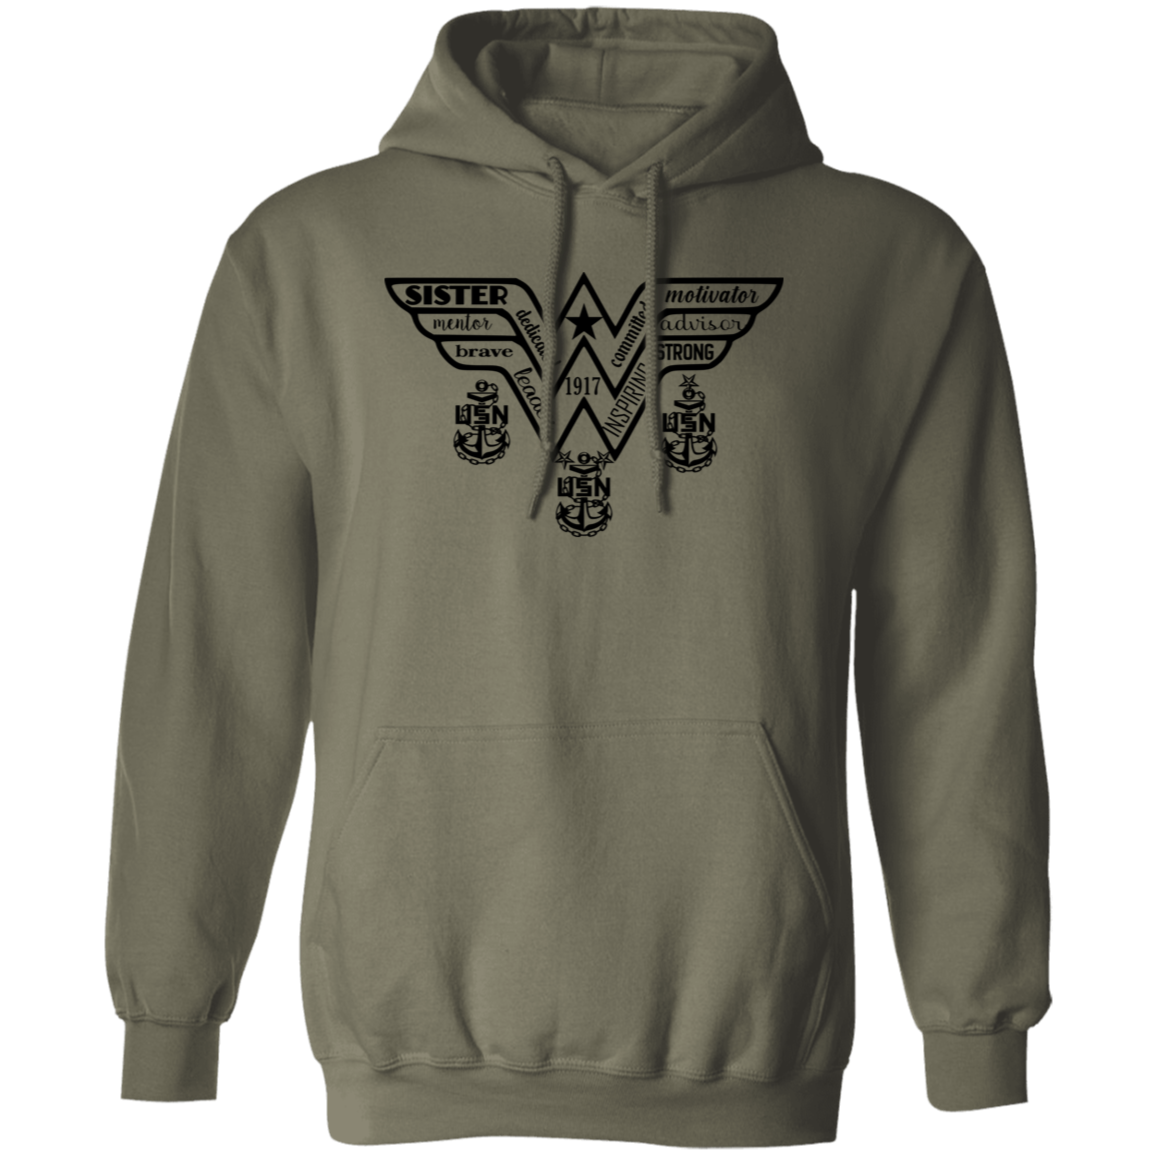 CPO WW Pullover Hoodie